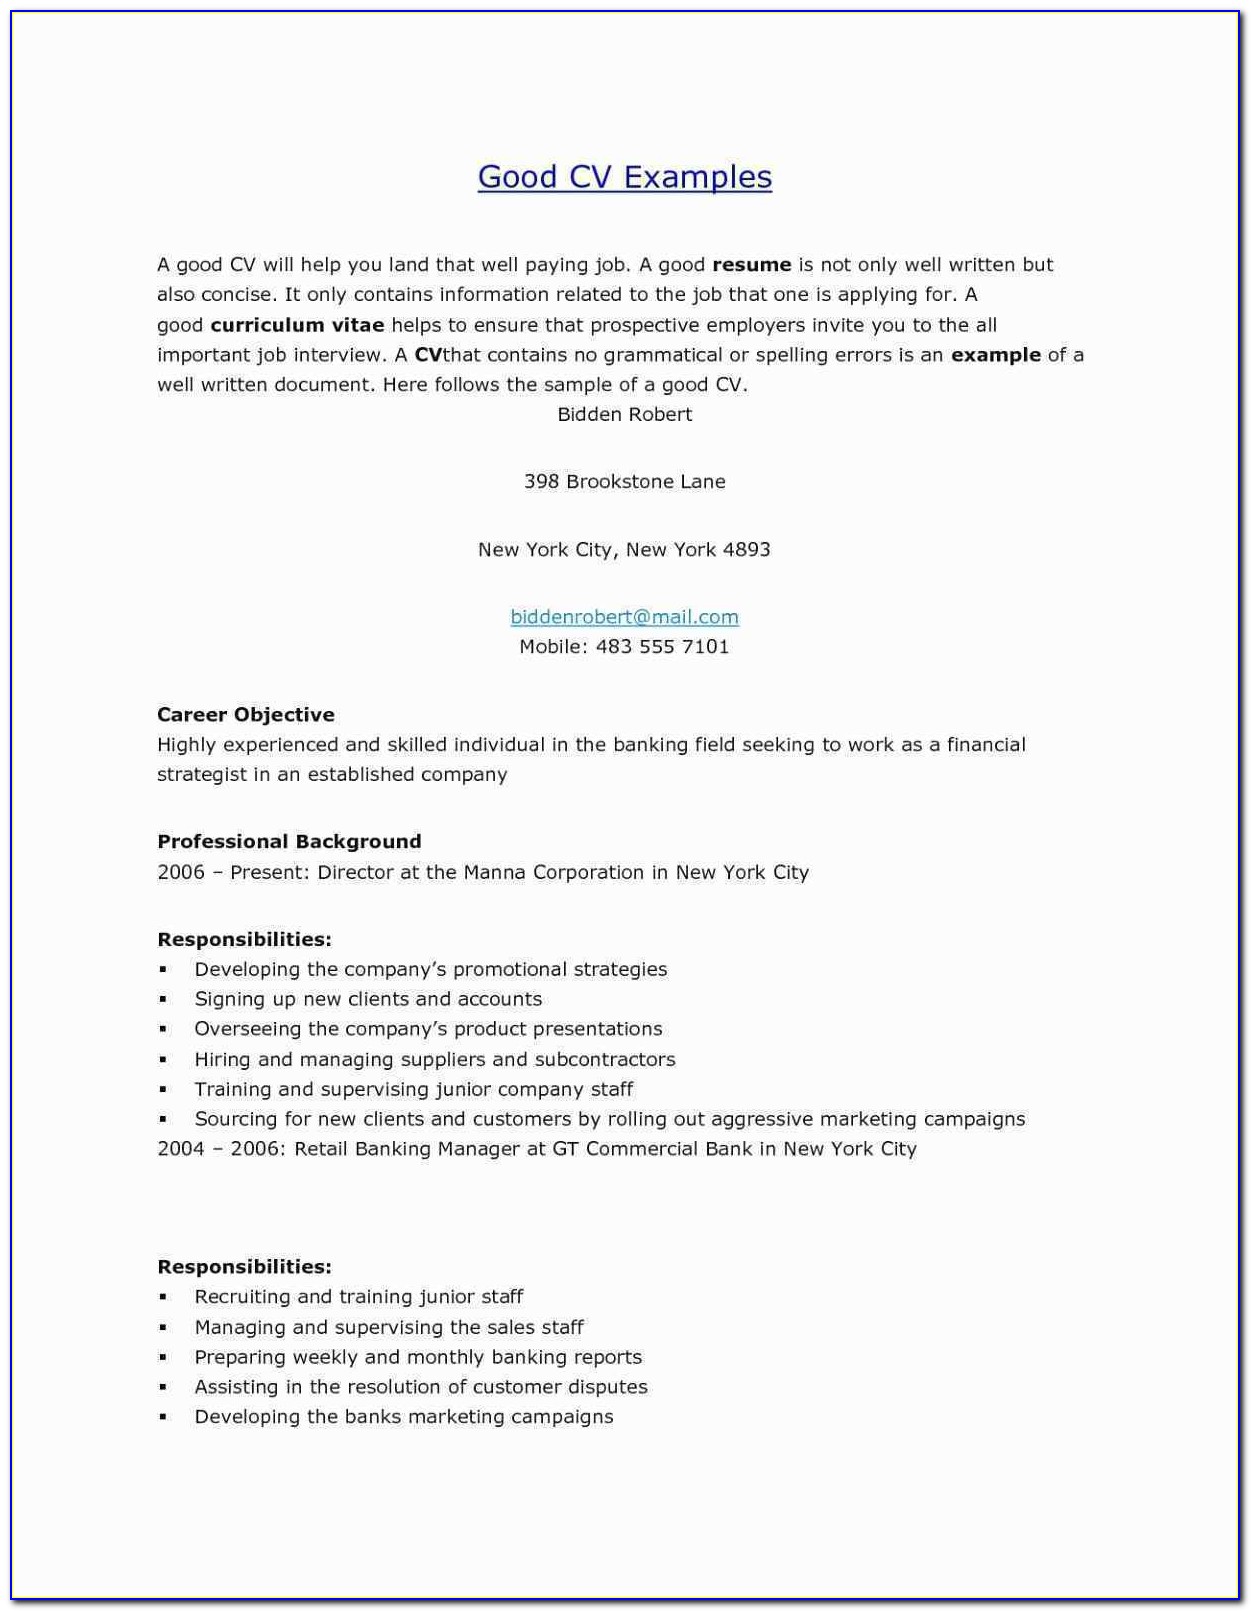 Cover Letter With Resume New Preparing A Resume And Cover Letter Fresh Resume Writing Tips Best